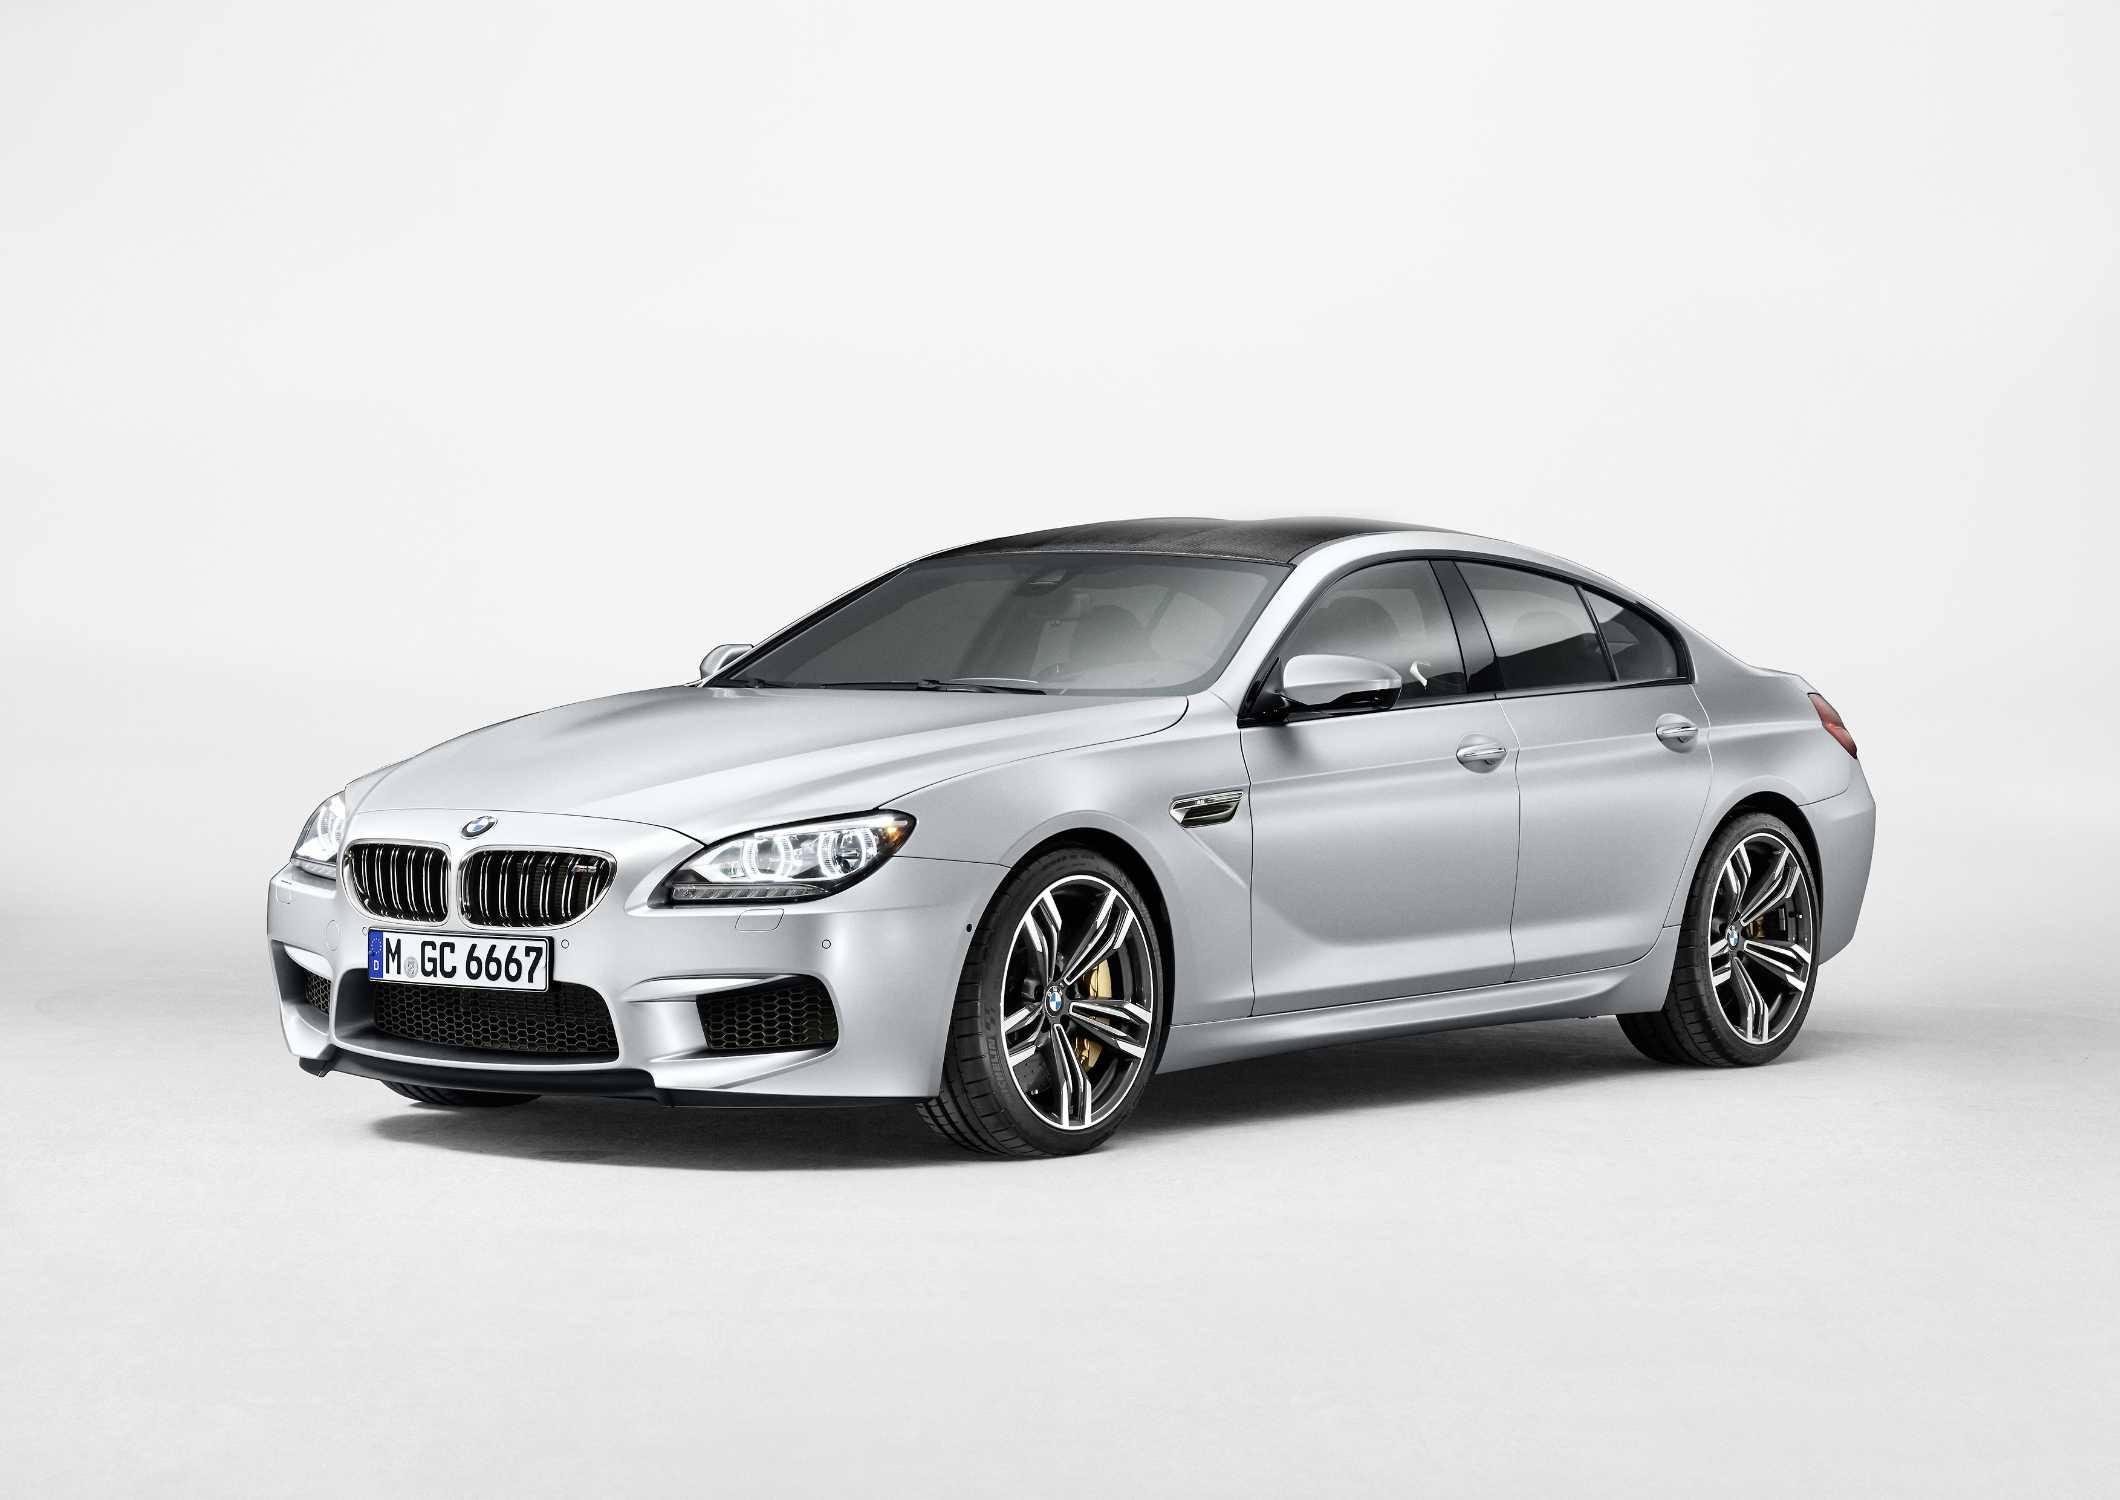 Introducing The All New Bmw M6 Gran Coupe